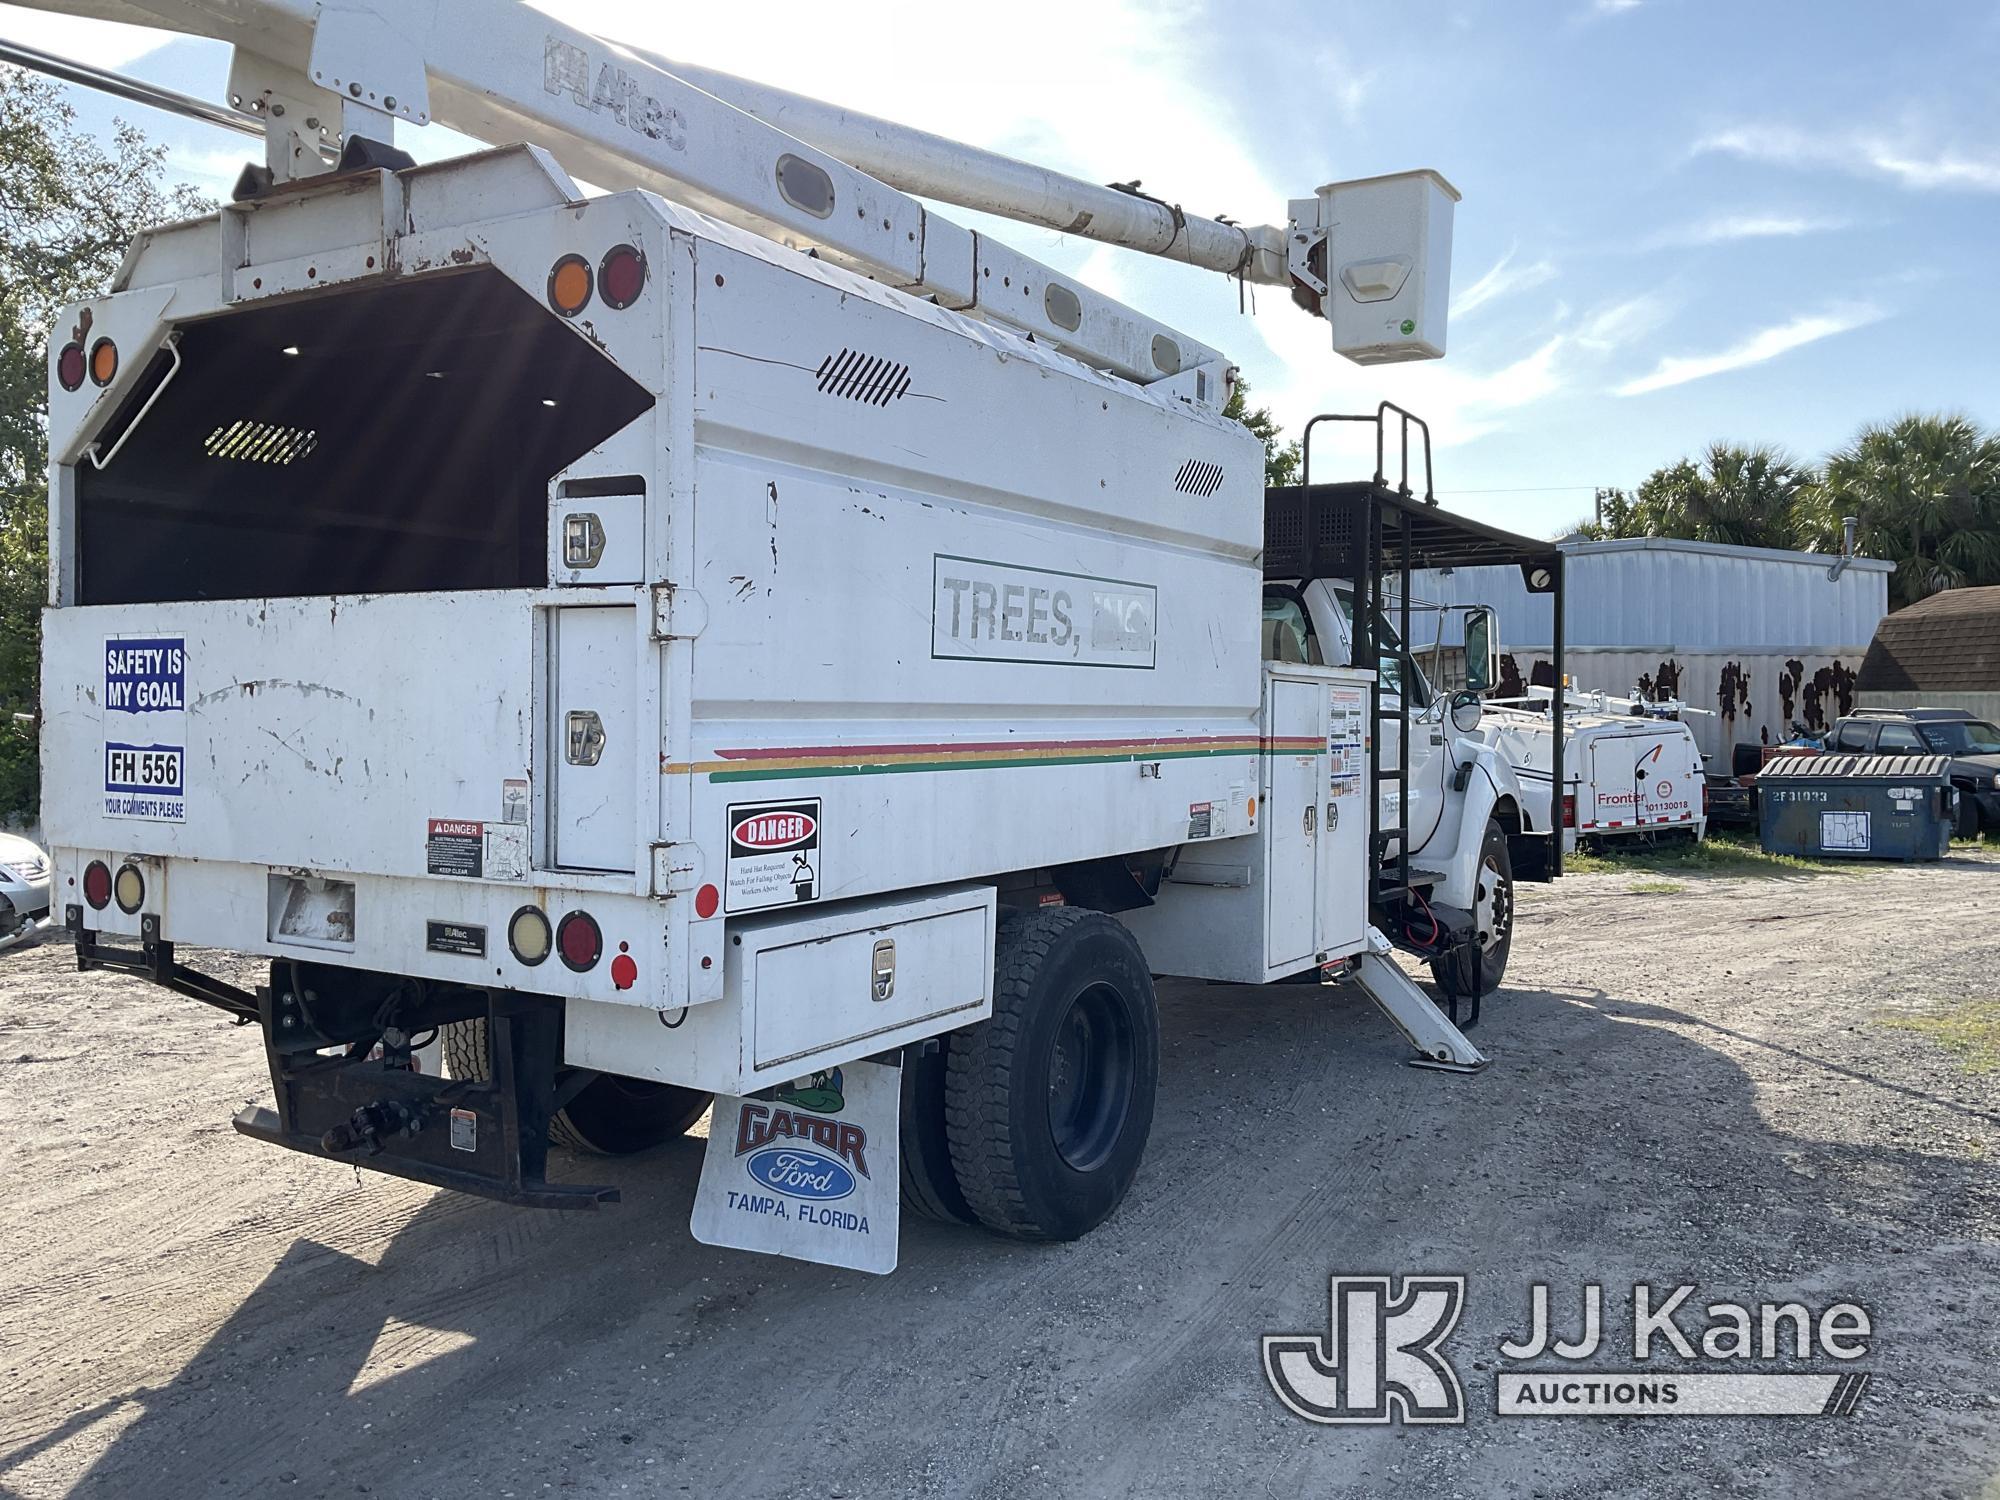 (Tampa, FL) Altec LRV-56, Over-Center Bucket Truck mounted behind cab on 2010 Ford F750 Chipper Dump